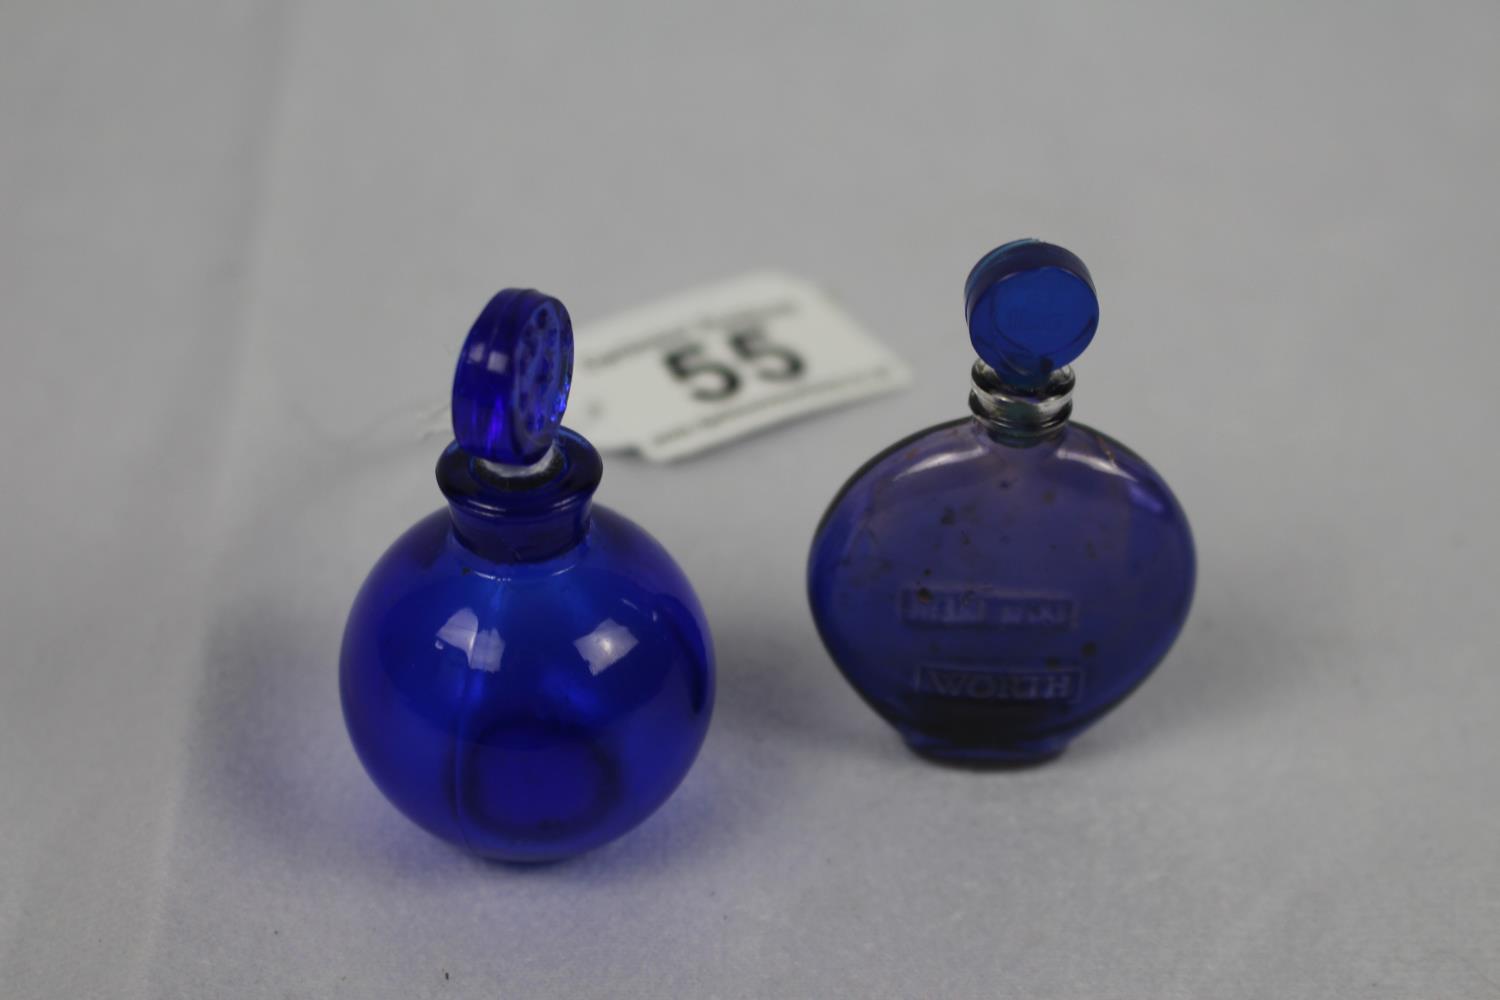 Pair of Lalique scent bottles - Image 2 of 2